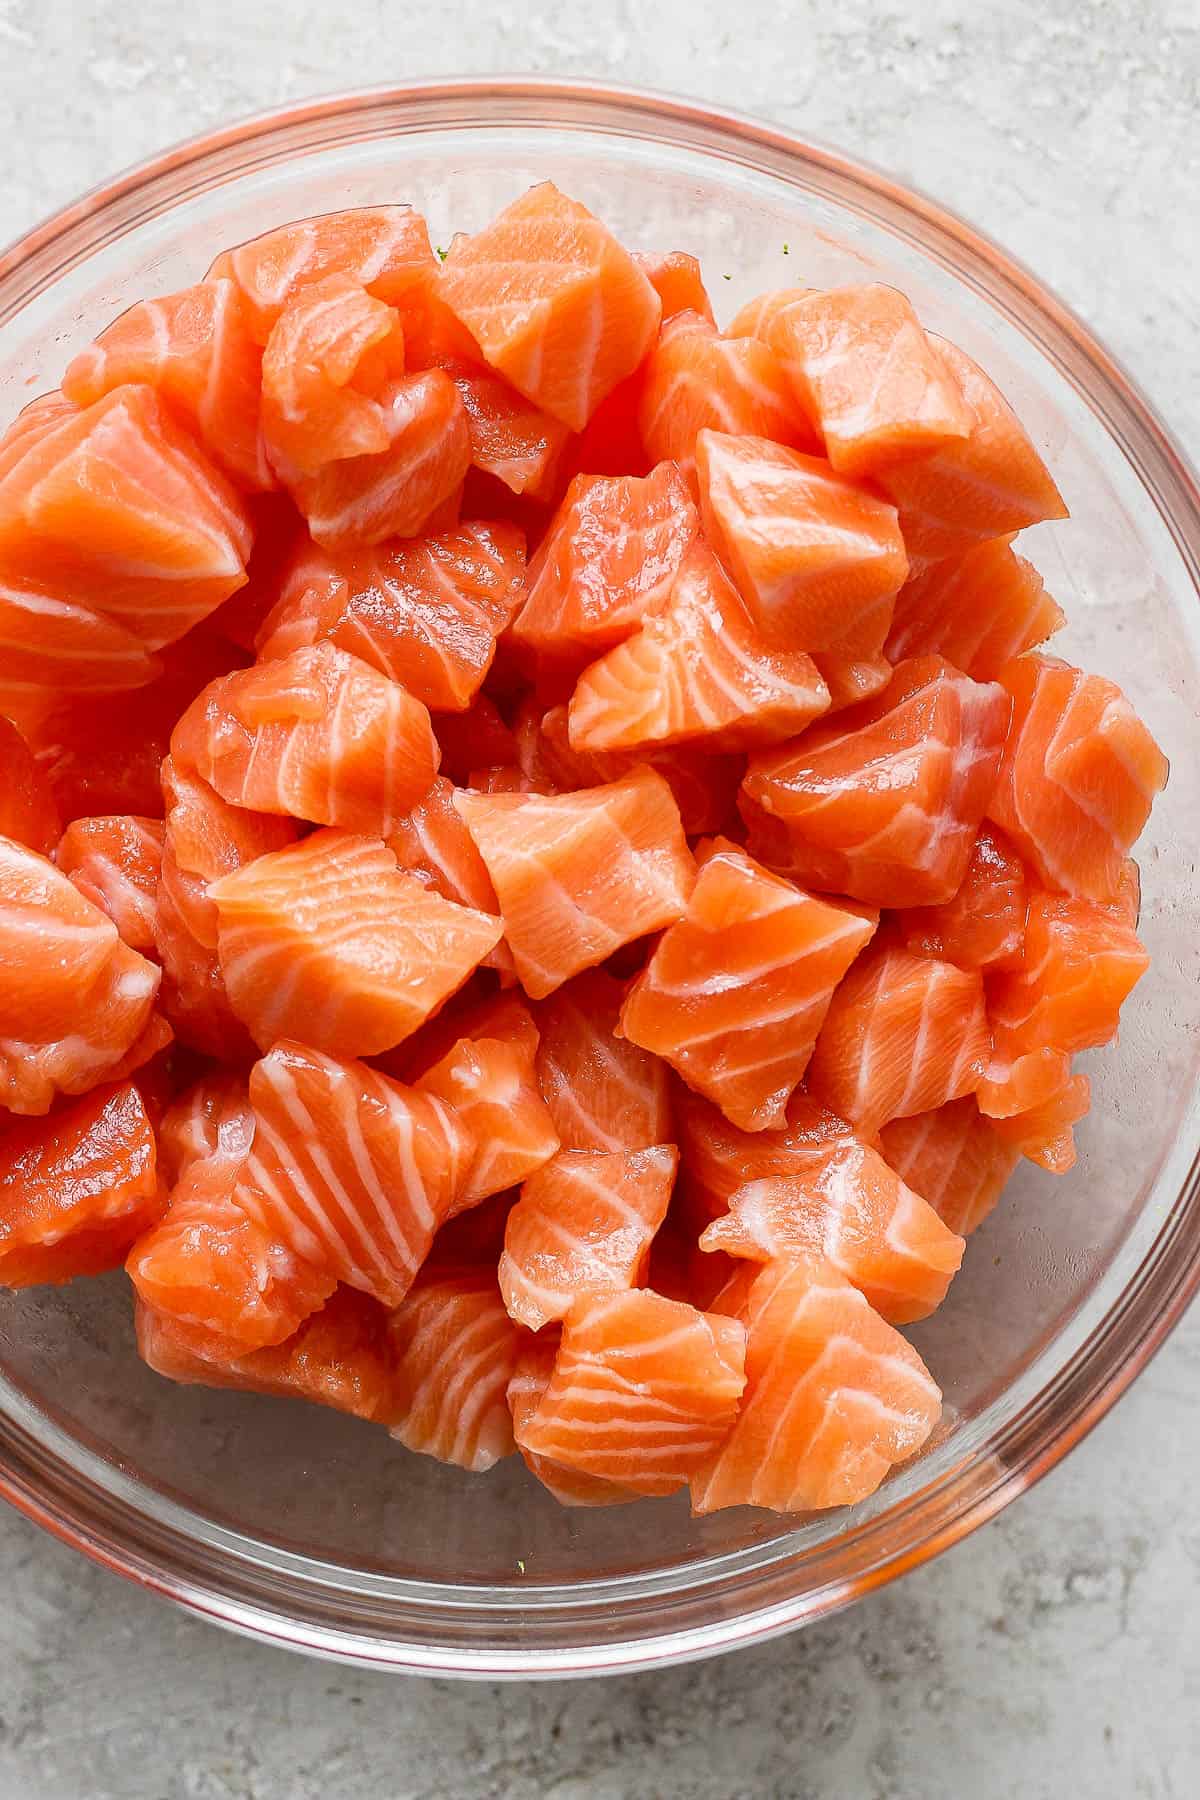 Cubed fresh salmon in a glass bowl.